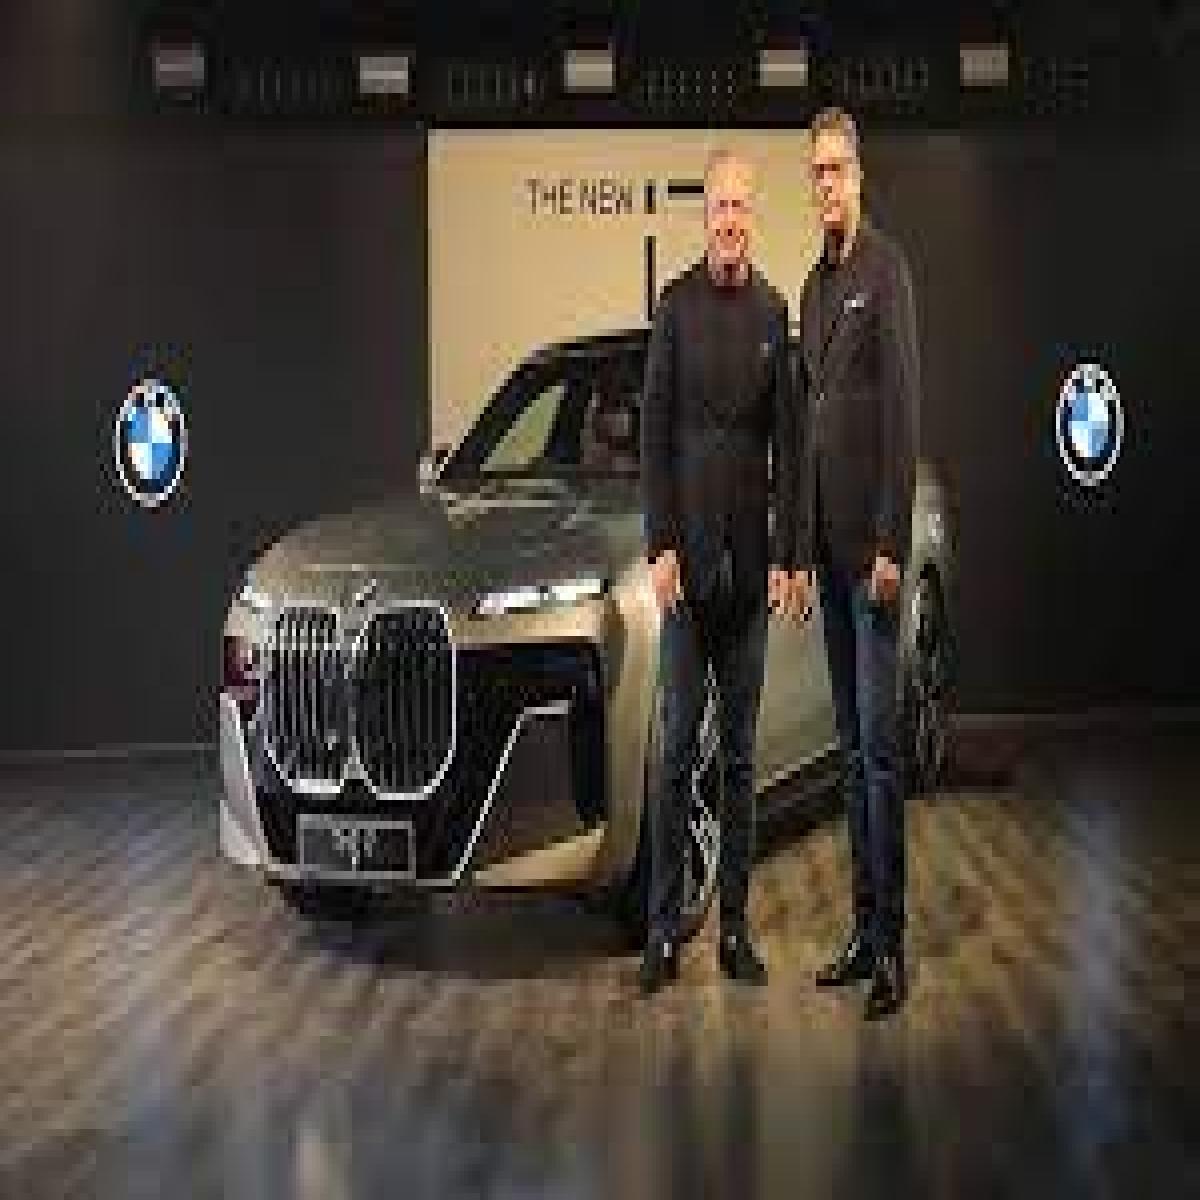 This is Forwardism. The All-New BMW 7 and the First-Ever BMW i7